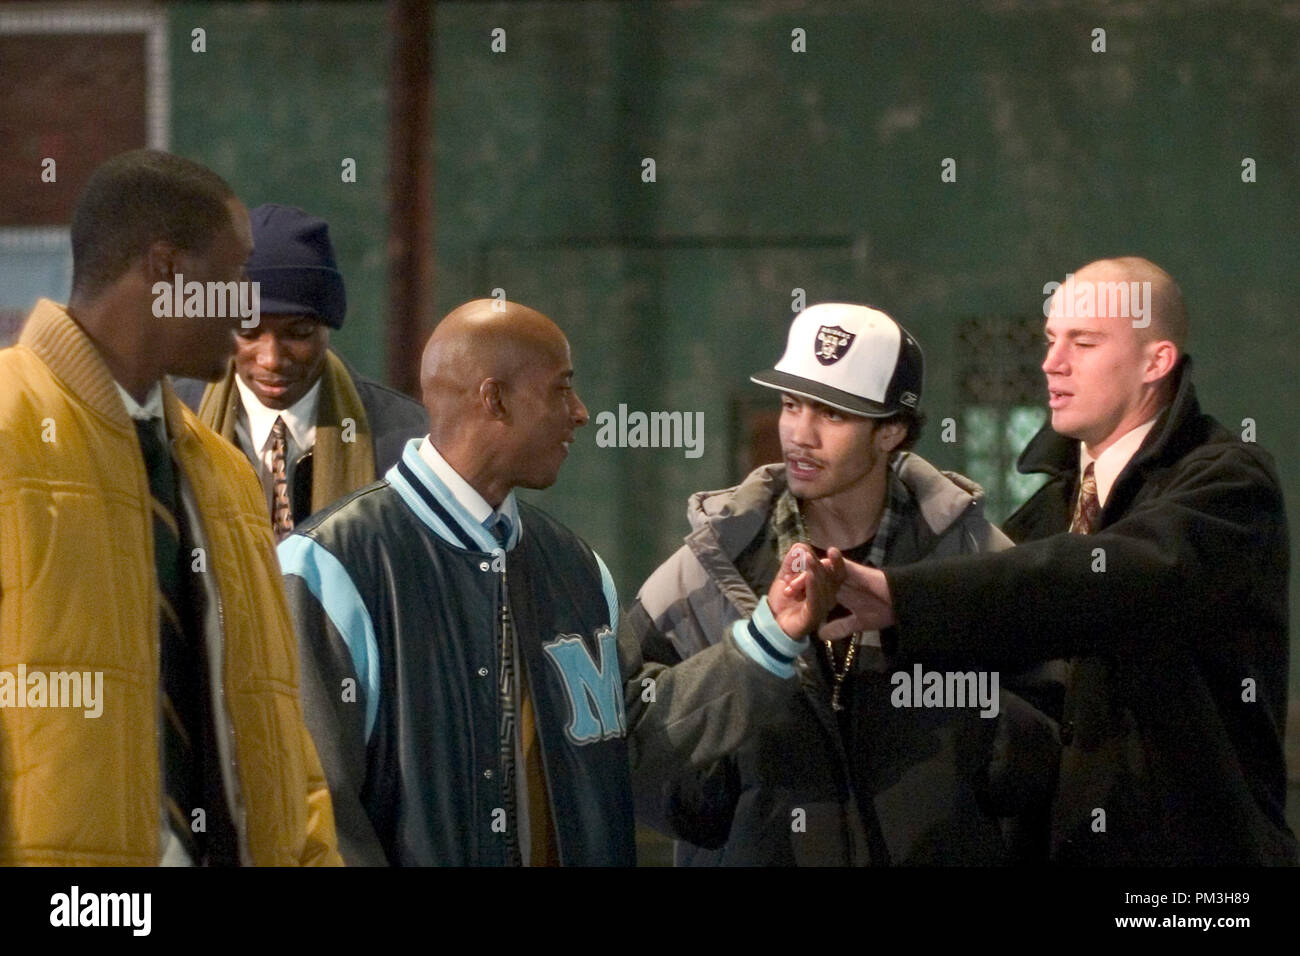 Film Still from 'Coach Carter' (front row, left to right) Rob Brown, Antwon Tanner, Rick Gonzalez, Channing Tatum (behind, left) Nana Gbewonyo © 2004 Paramount Pictures Photo Credit: Tracy Bennett  File Reference # 30735946THA  For Editorial Use Only -  All Rights Reserved Stock Photo